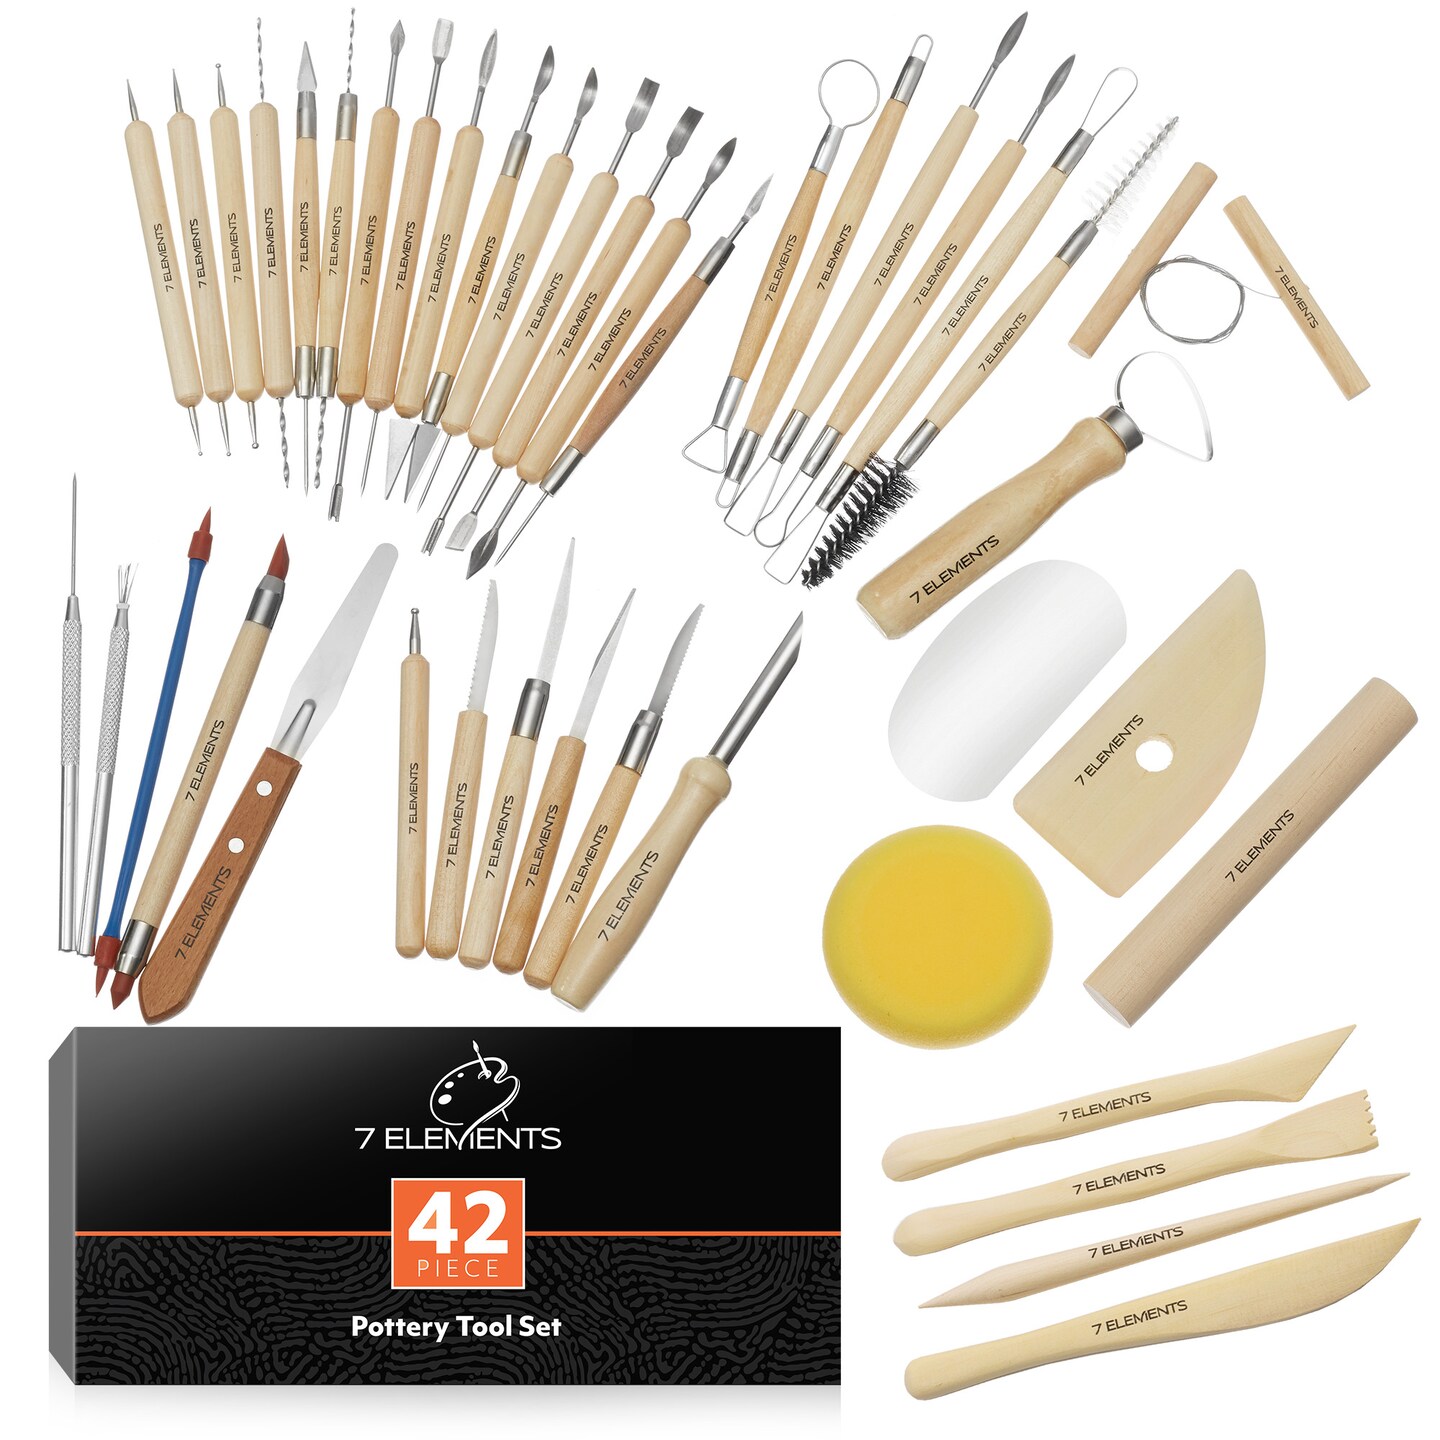 43 Piece Clay Tool Set by Craft Smart®